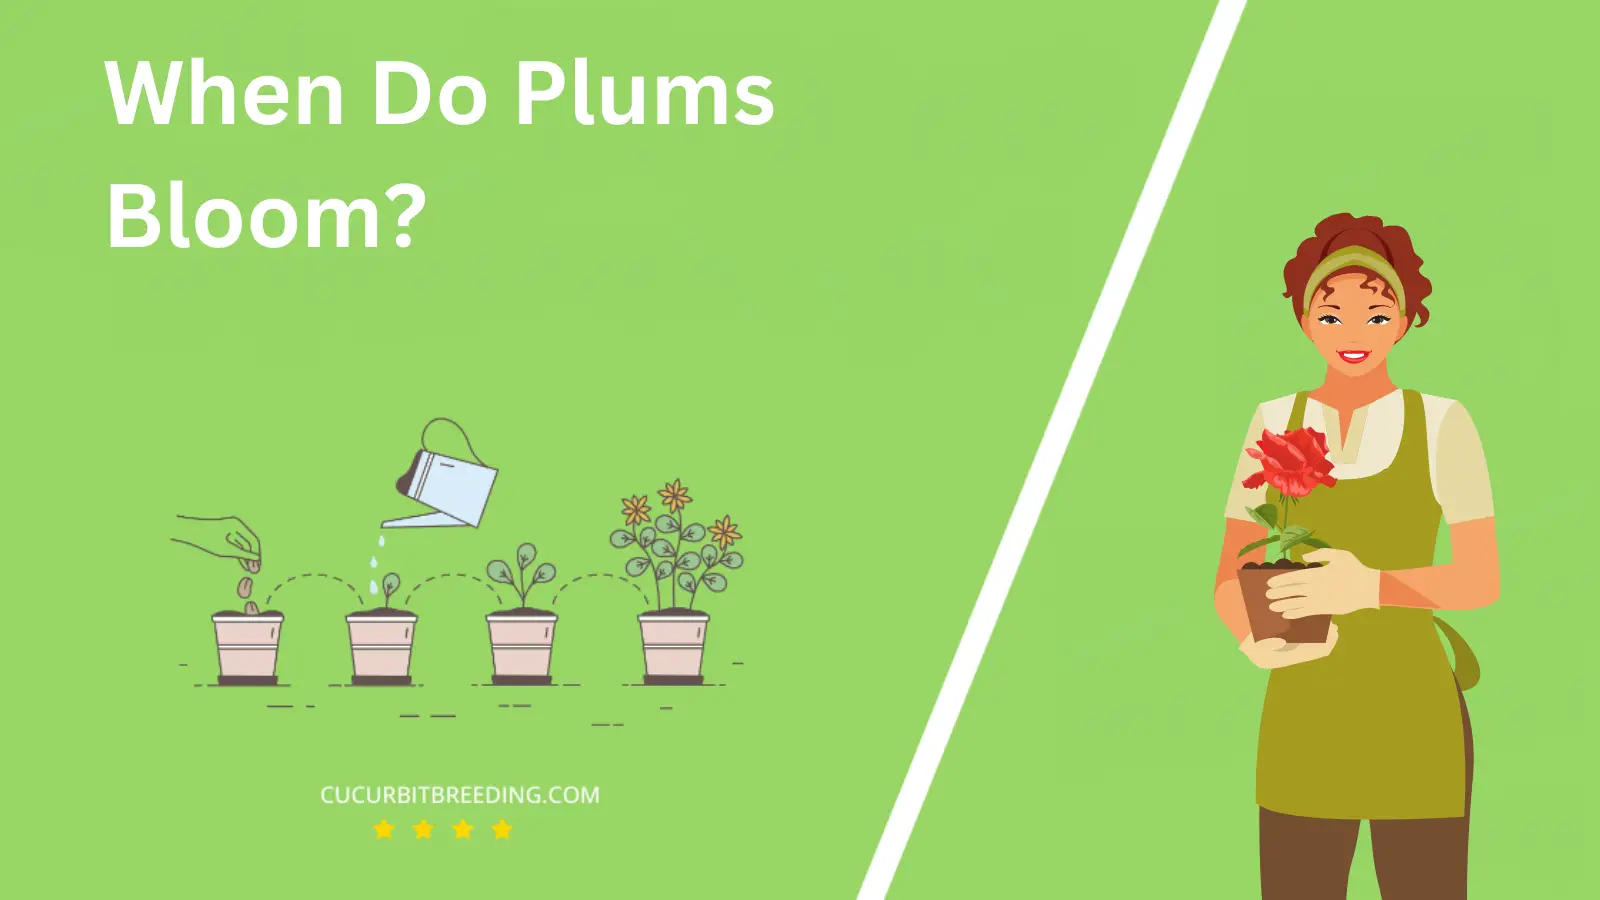 When Do Plums Bloom?